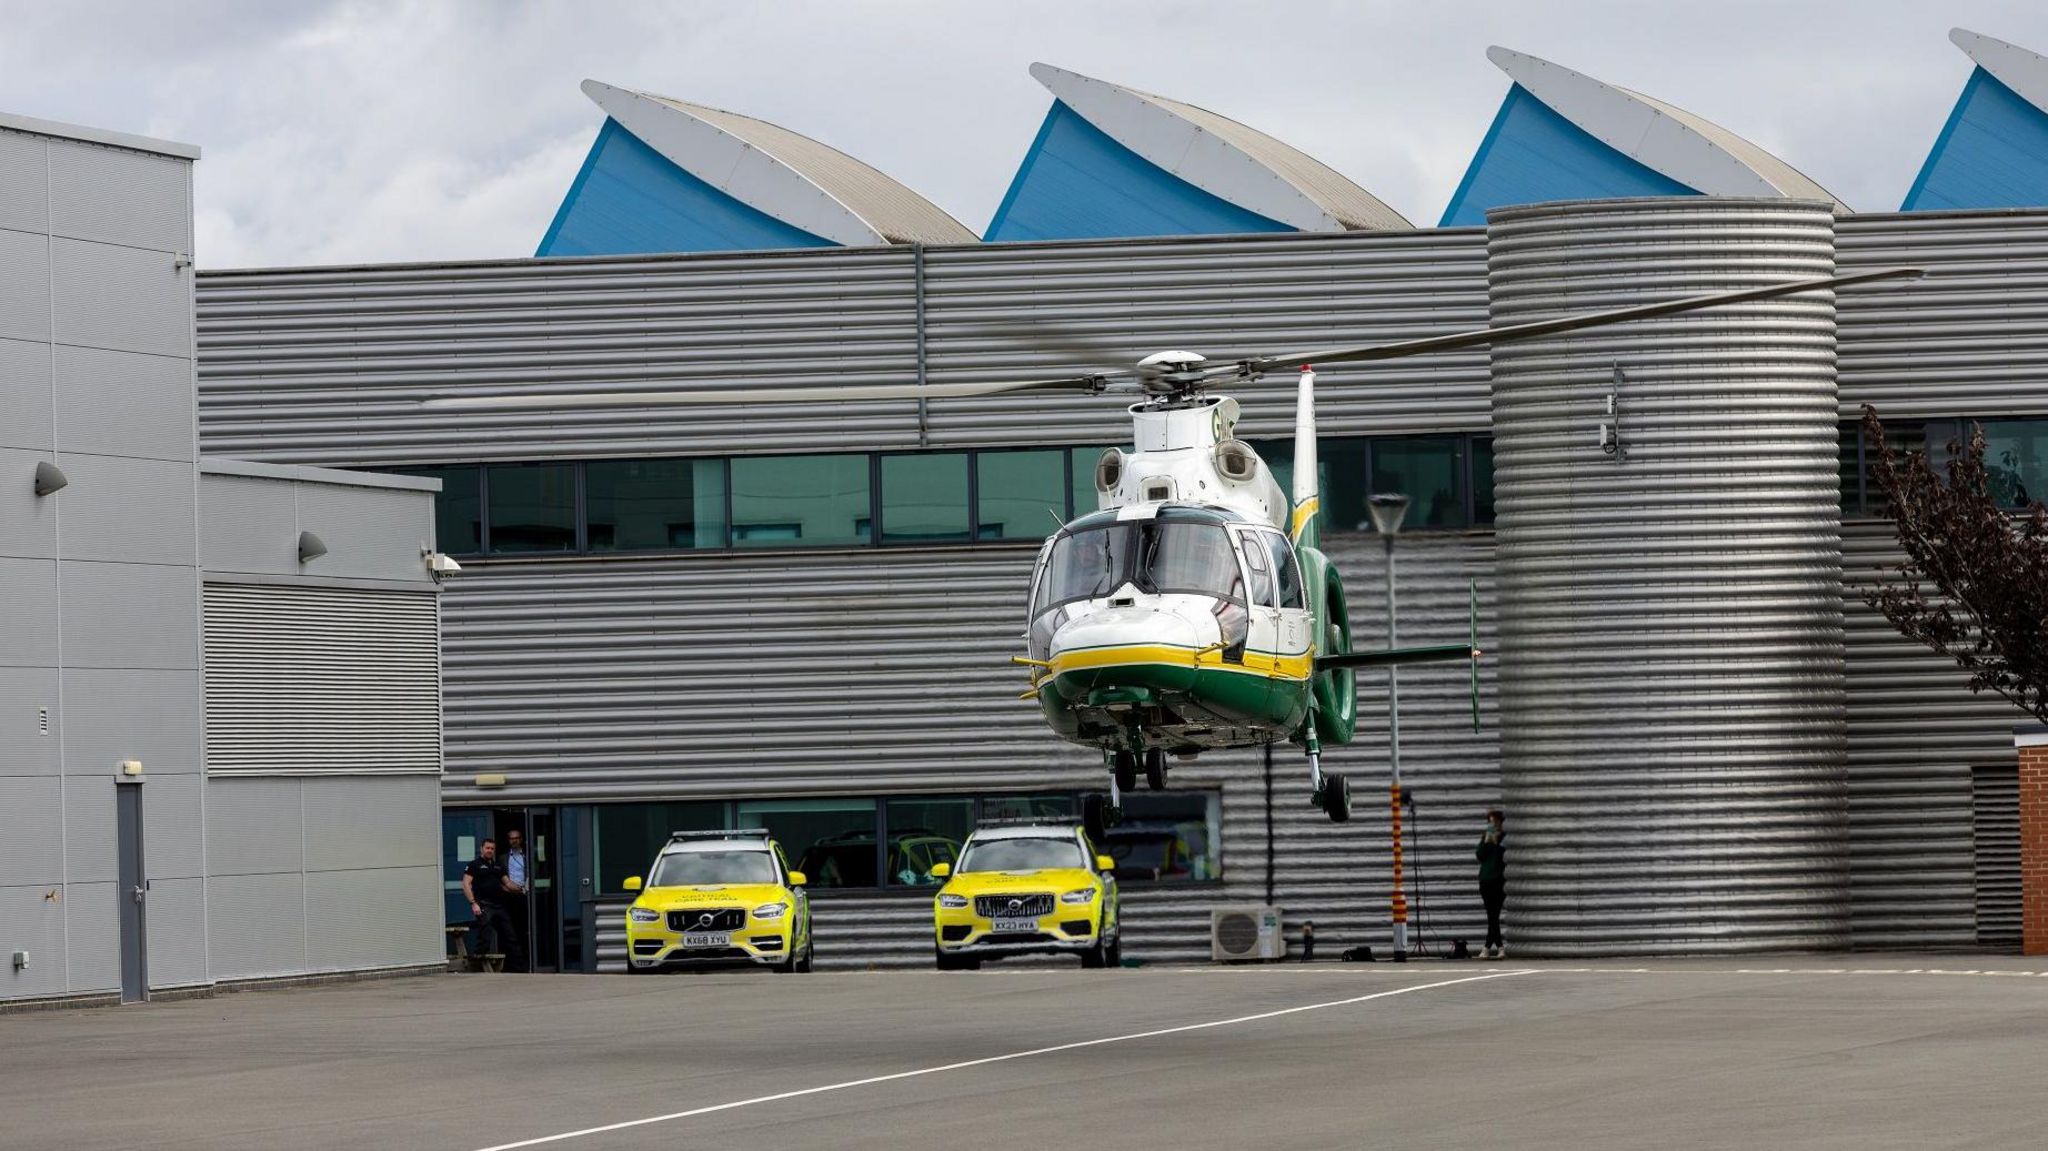 A GNAAS air ambulance taking off ahead of two rapid response vehicles